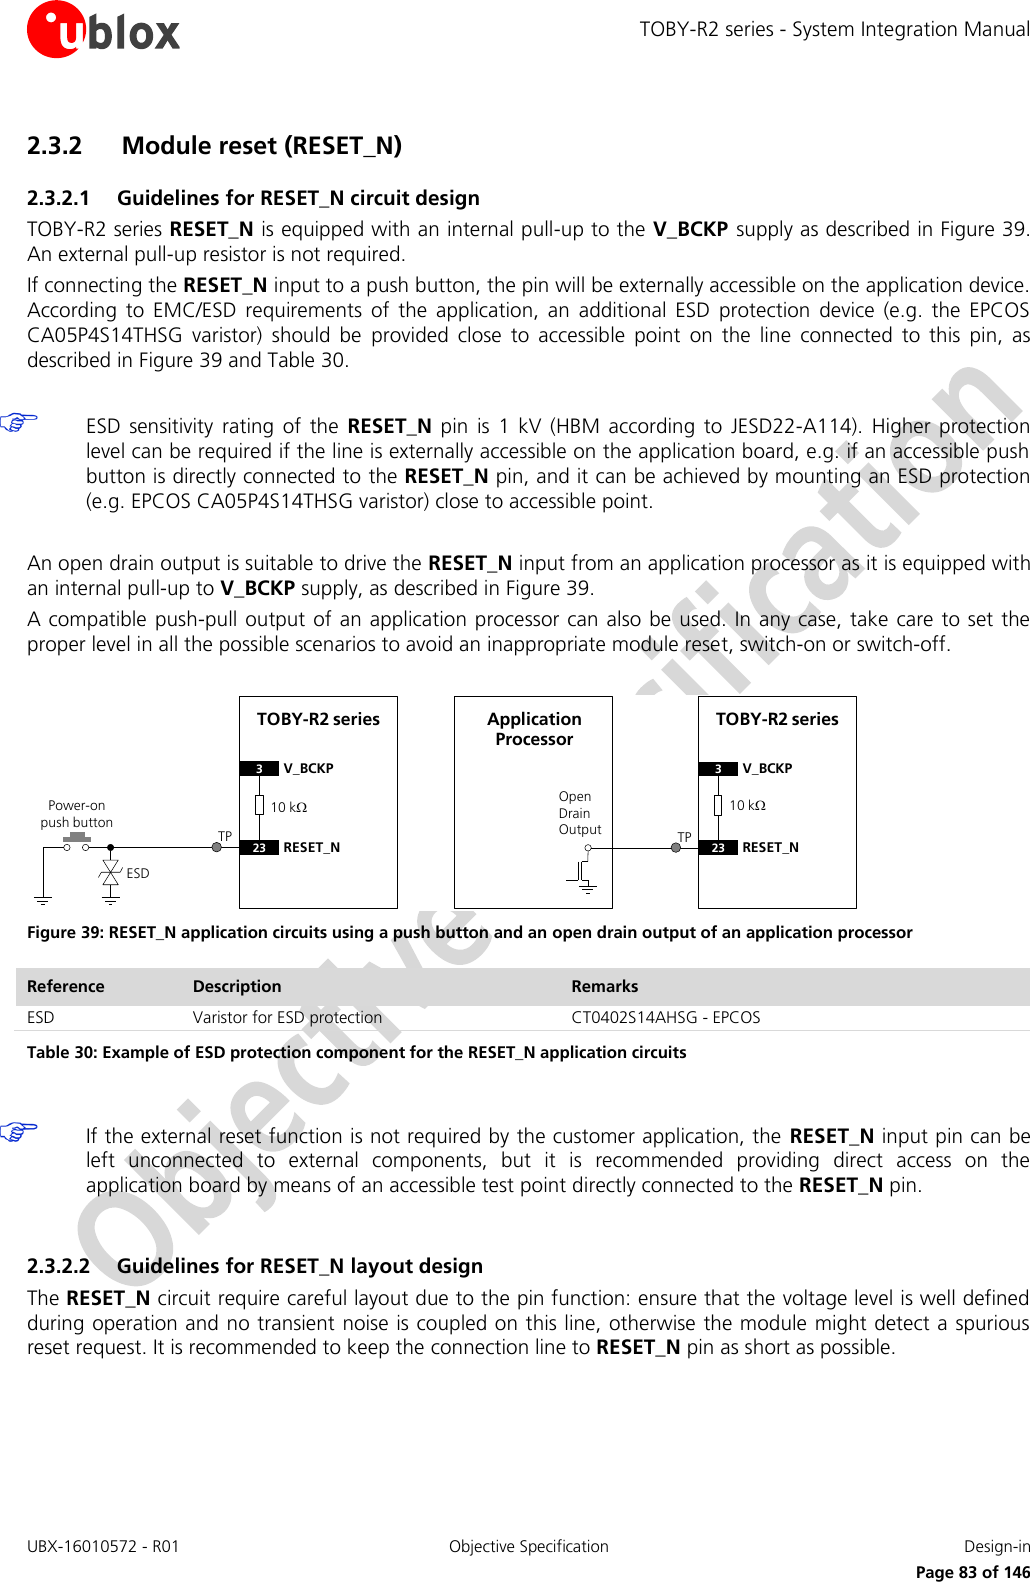 TOBY-R2 series - System Integration Manual UBX-16010572 - R01  Objective Specification  Design-in     Page 83 of 146 2.3.2 Module reset (RESET_N) 2.3.2.1 Guidelines for RESET_N circuit design TOBY-R2 series RESET_N is equipped with an internal pull-up to the V_BCKP  supply as described in Figure 39. An external pull-up resistor is not required. If connecting the RESET_N input to a push button, the pin will be externally accessible on the application device. According  to  EMC/ESD  requirements  of  the  application,  an  additional  ESD  protection  device  (e.g.  the  EPCOS CA05P4S14THSG  varistor)  should  be  provided  close  to  accessible  point  on  the  line  connected  to  this  pin,  as described in Figure 39 and Table 30.   ESD  sensitivity  rating  of  the  RESET_N  pin  is  1  kV  (HBM  according  to  JESD22-A114).  Higher  protection level can be required if the line is externally accessible on the application board, e.g. if an accessible push button is directly connected to the RESET_N pin, and it can be achieved by mounting an ESD protection (e.g. EPCOS CA05P4S14THSG varistor) close to accessible point.  An open drain output is suitable to drive the RESET_N input from an application processor as it is equipped with an internal pull-up to V_BCKP supply, as described in Figure 39. A compatible push-pull output of an application processor can  also be used. In any case,  take care to set  the proper level in all the possible scenarios to avoid an inappropriate module reset, switch-on or switch-off.  TOBY-R2 series3V_BCKP23 RESET_NPower-on push buttonESDOpen Drain OutputApplication ProcessorTOBY-R2 series3V_BCKP23 RESET_NTP TP10 k10 k Figure 39: RESET_N application circuits using a push button and an open drain output of an application processor Reference Description Remarks ESD Varistor for ESD protection CT0402S14AHSG - EPCOS Table 30: Example of ESD protection component for the RESET_N application circuits   If the external reset function is not required by the customer application, the  RESET_N input pin can be left  unconnected  to  external  components,  but  it  is  recommended  providing  direct  access  on  the application board by means of an accessible test point directly connected to the RESET_N pin.  2.3.2.2 Guidelines for RESET_N layout design The RESET_N circuit require careful layout due to the pin function: ensure that the voltage level is well defined during operation and no transient noise is coupled on this line, otherwise the module might detect a spurious reset request. It is recommended to keep the connection line to RESET_N pin as short as possible.  